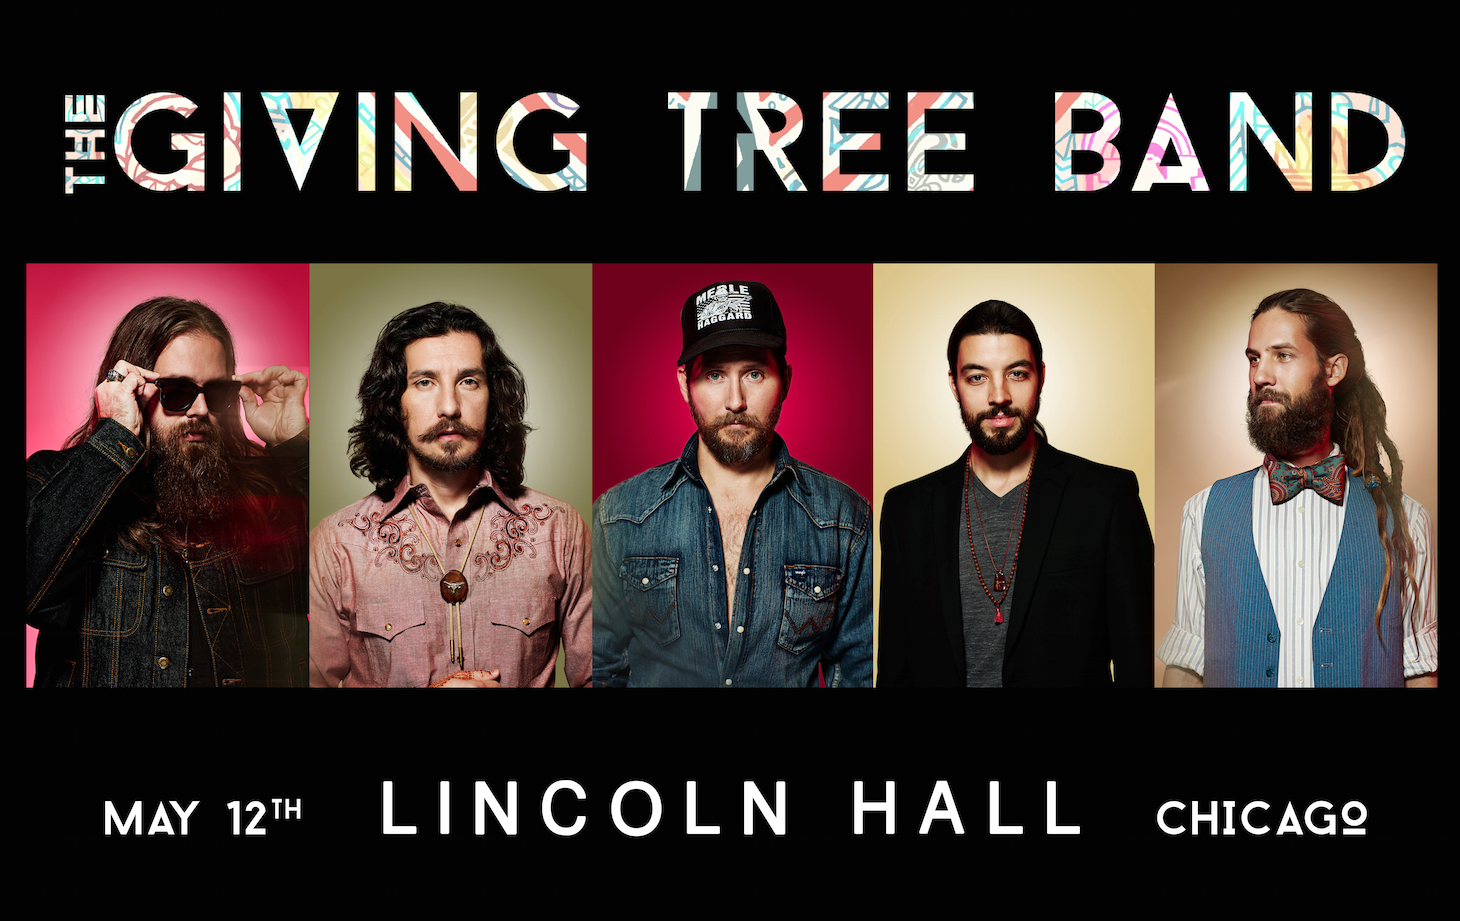 The Giving Tree Band CD Release Show At Lincoln Hall